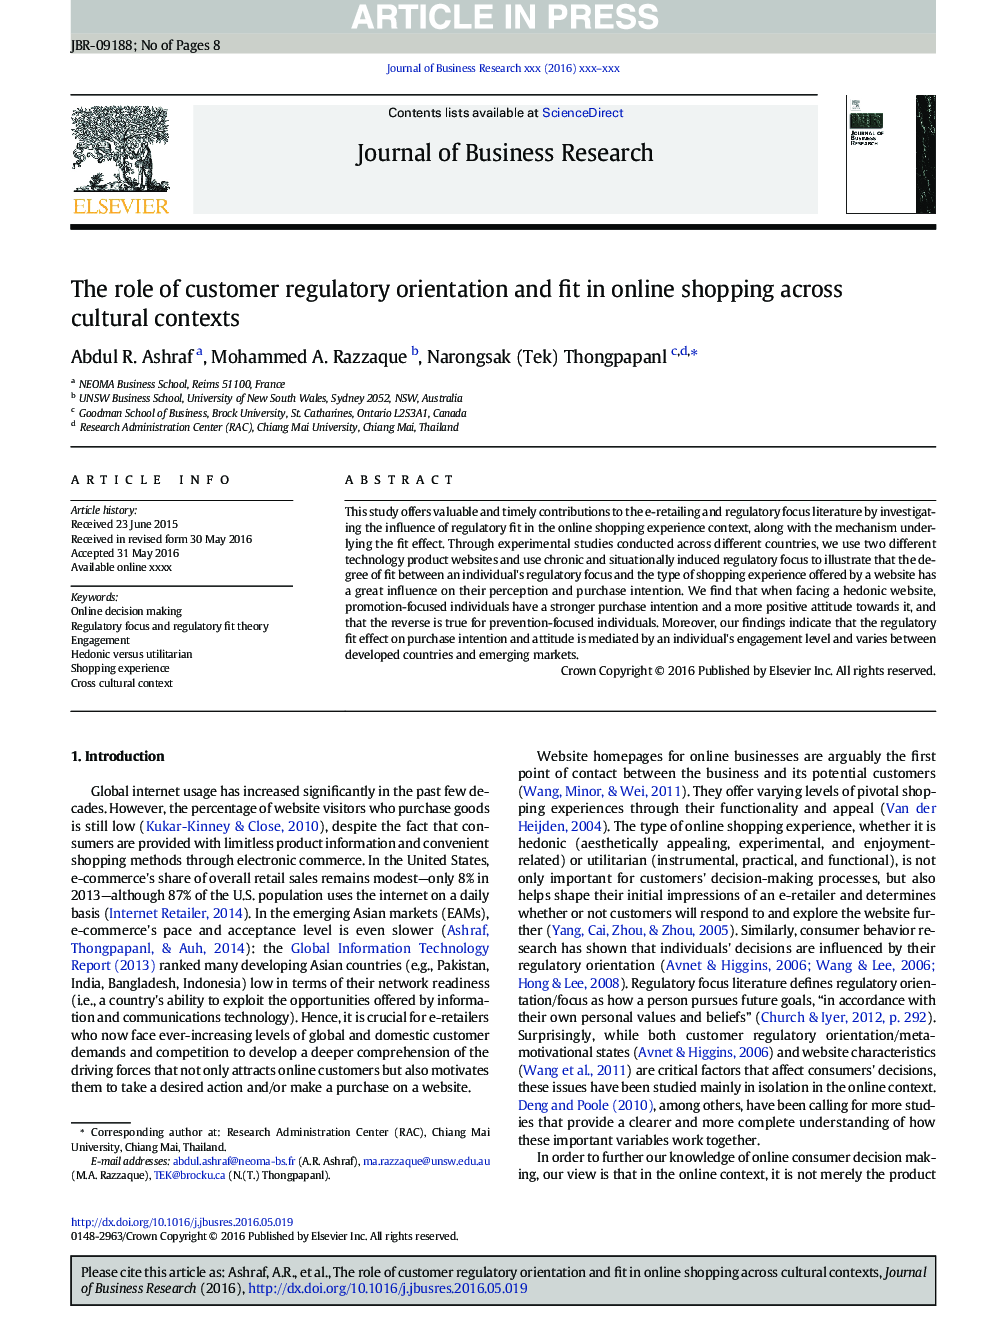 The role of customer regulatory orientation and fit in online shopping across cultural contexts